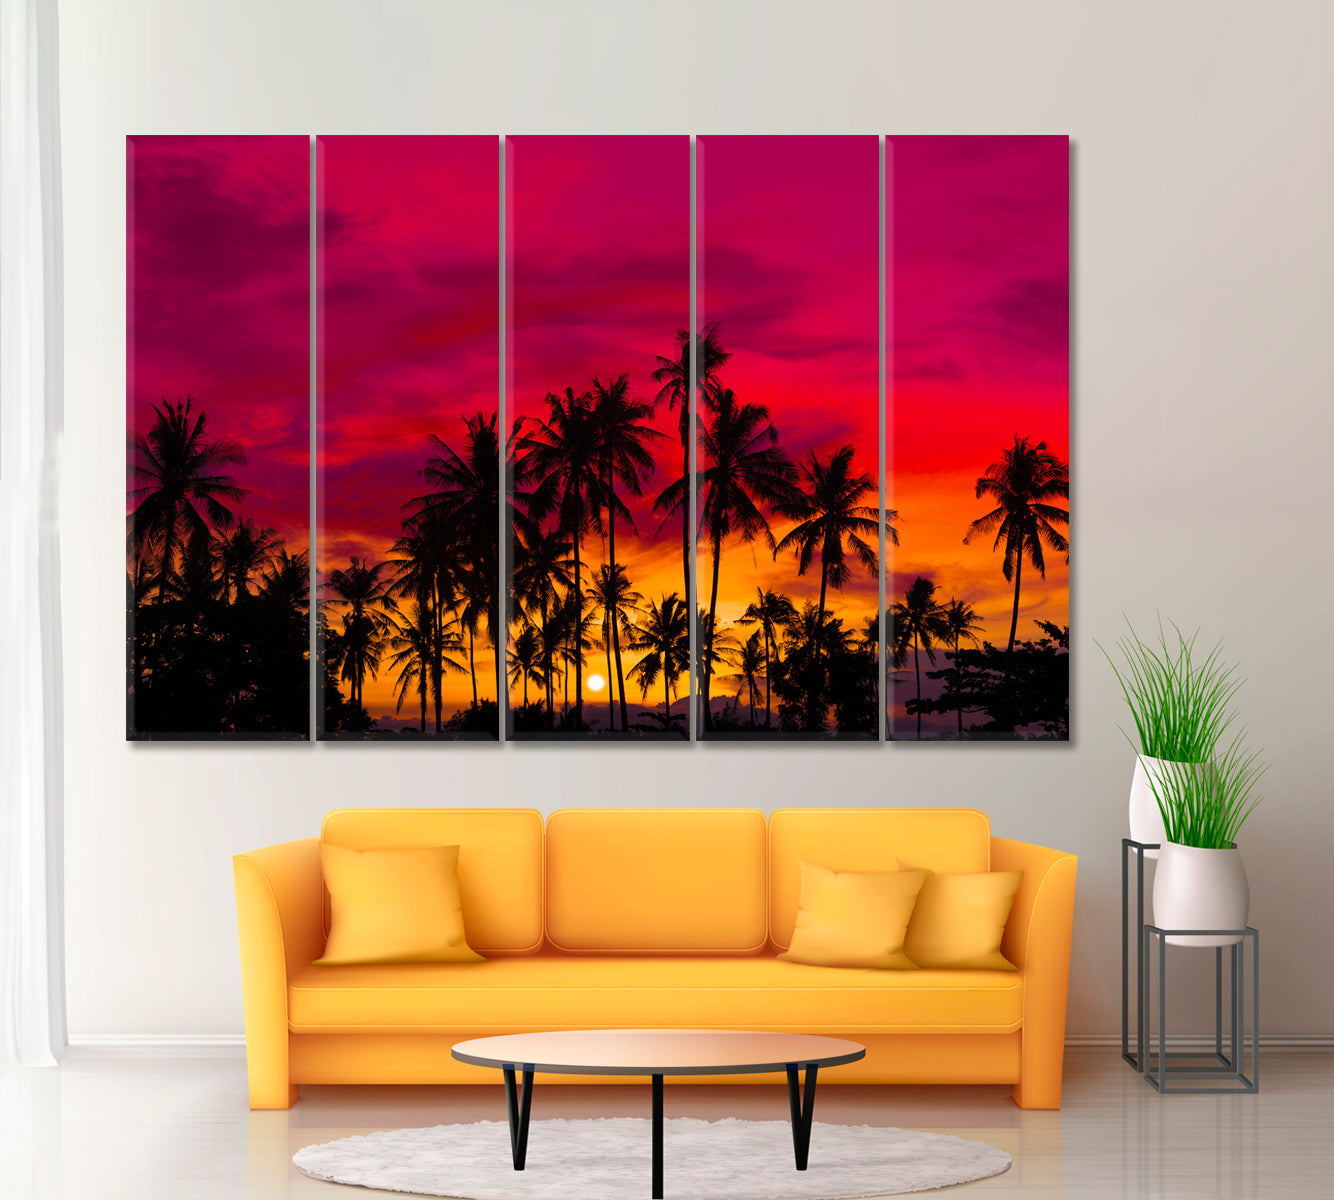 Coconut Palm Trees at Sunset Canvas Print ArtLexy 5 Panels 36"x24" inches 